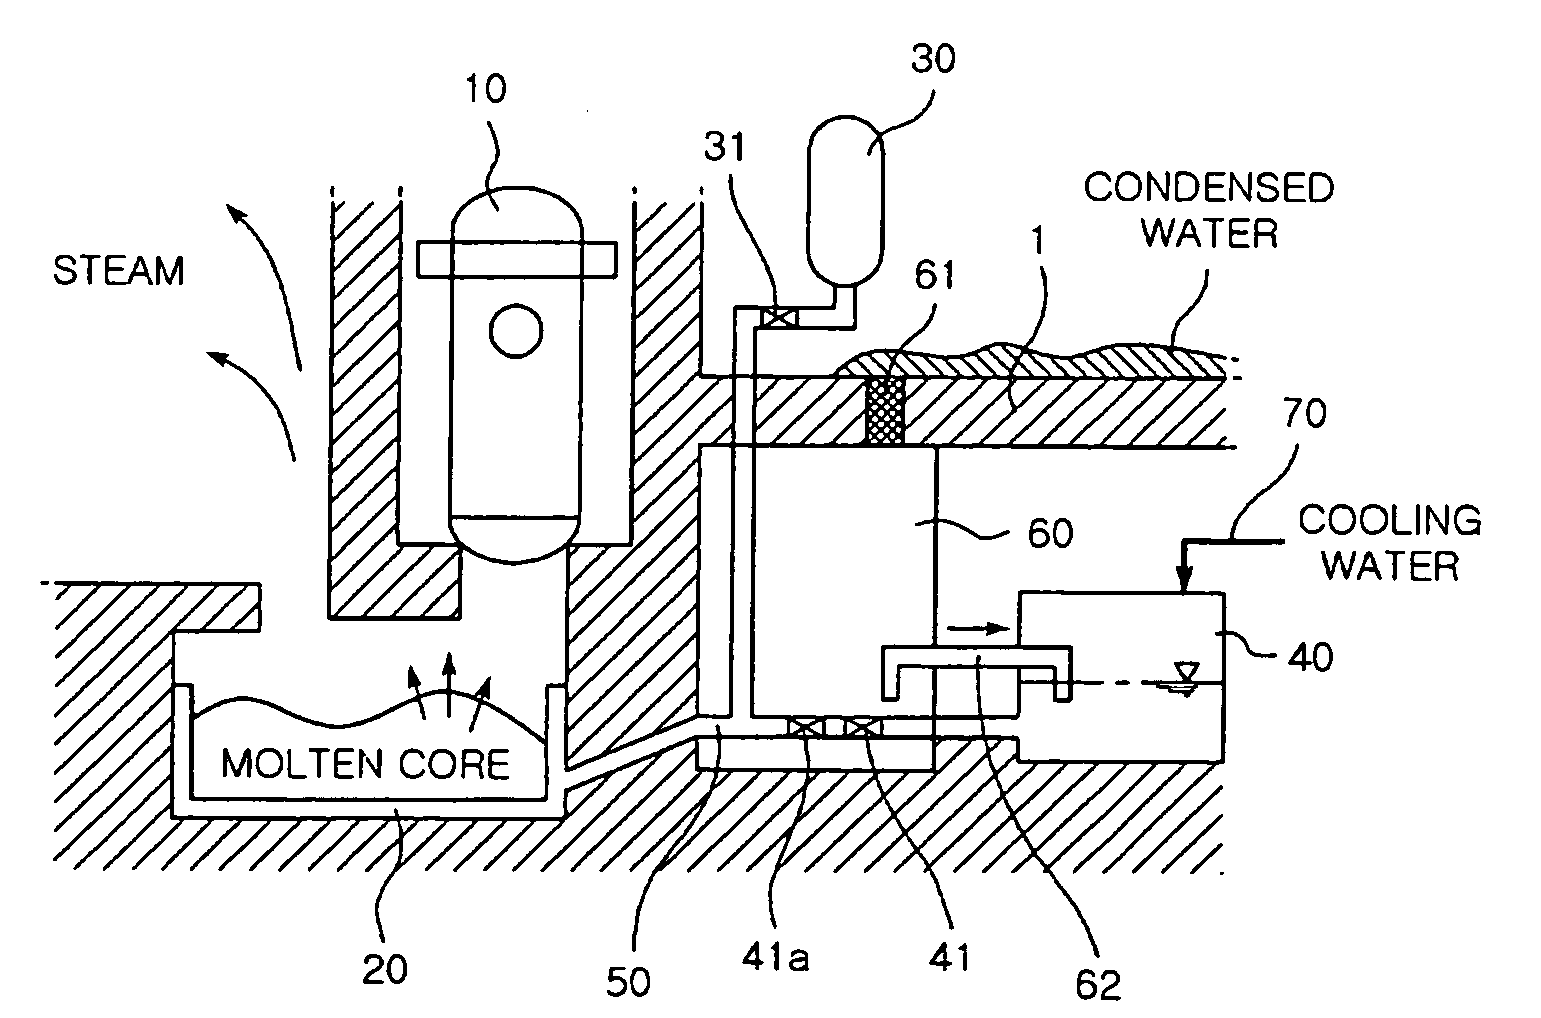 Passive cooling and arresting device for molten core material